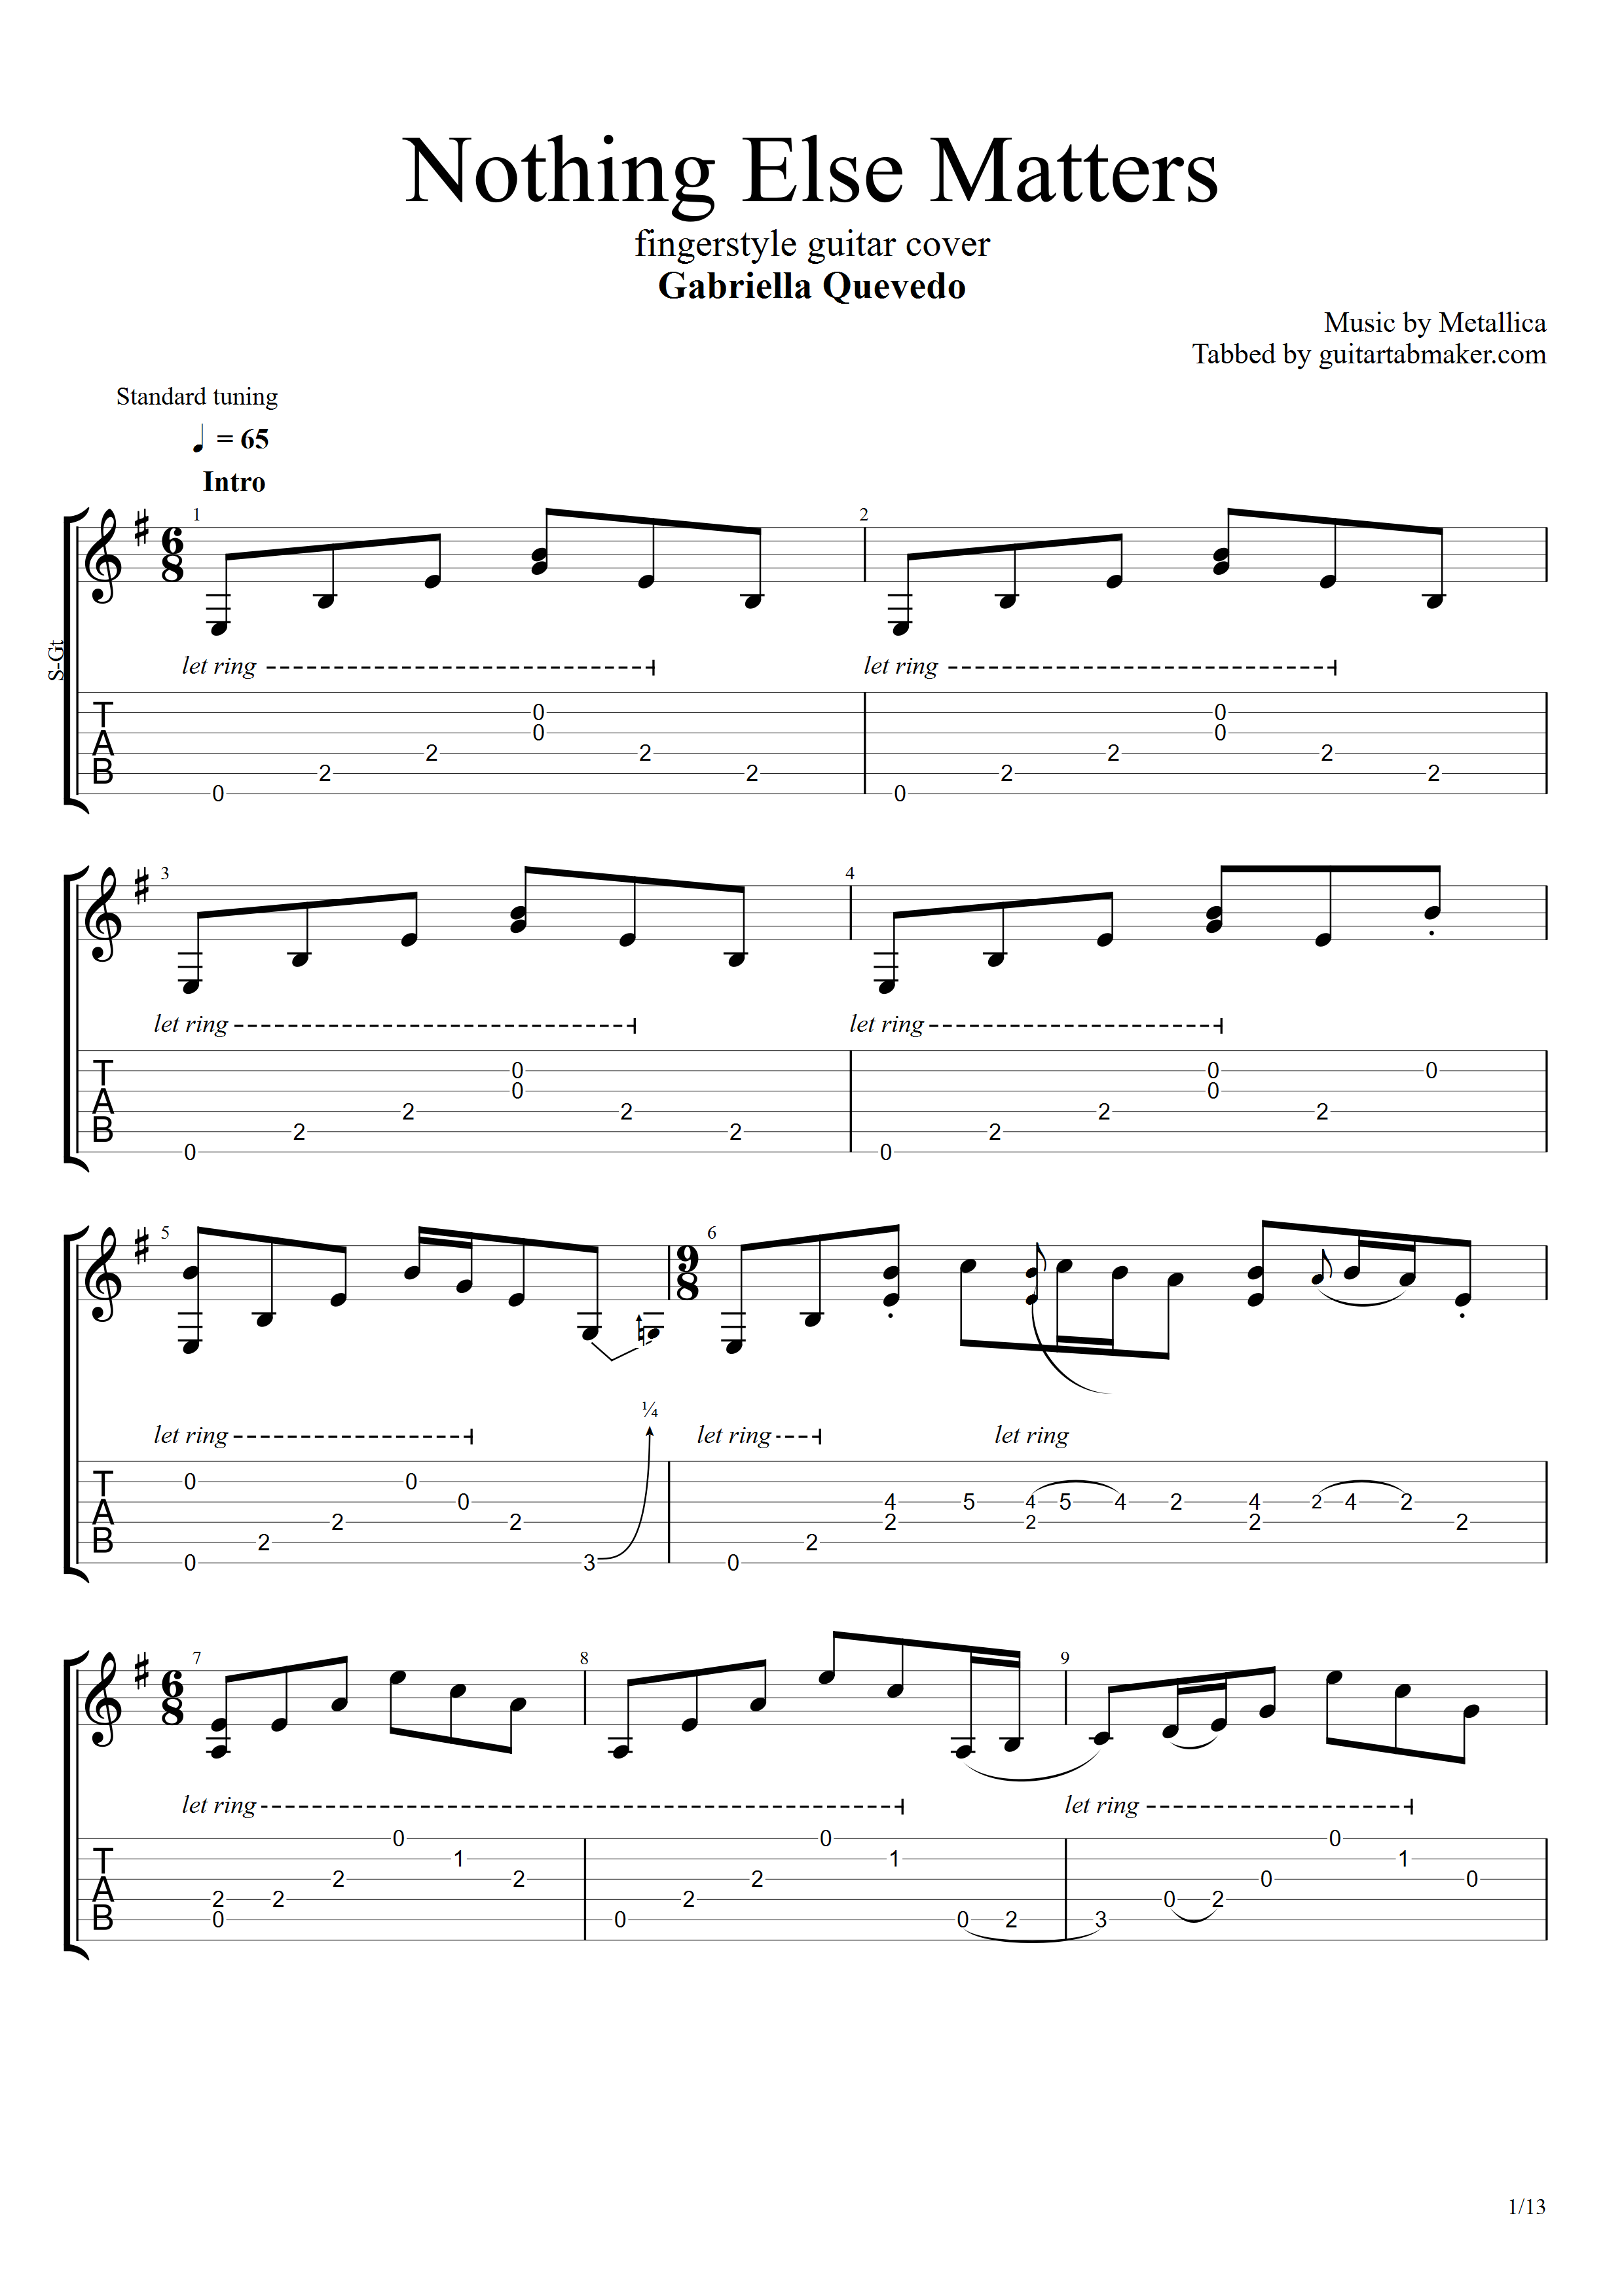 PDF guitar tabs and Guitar Pro tabs: FINGERSTYLE GUITAR TAB